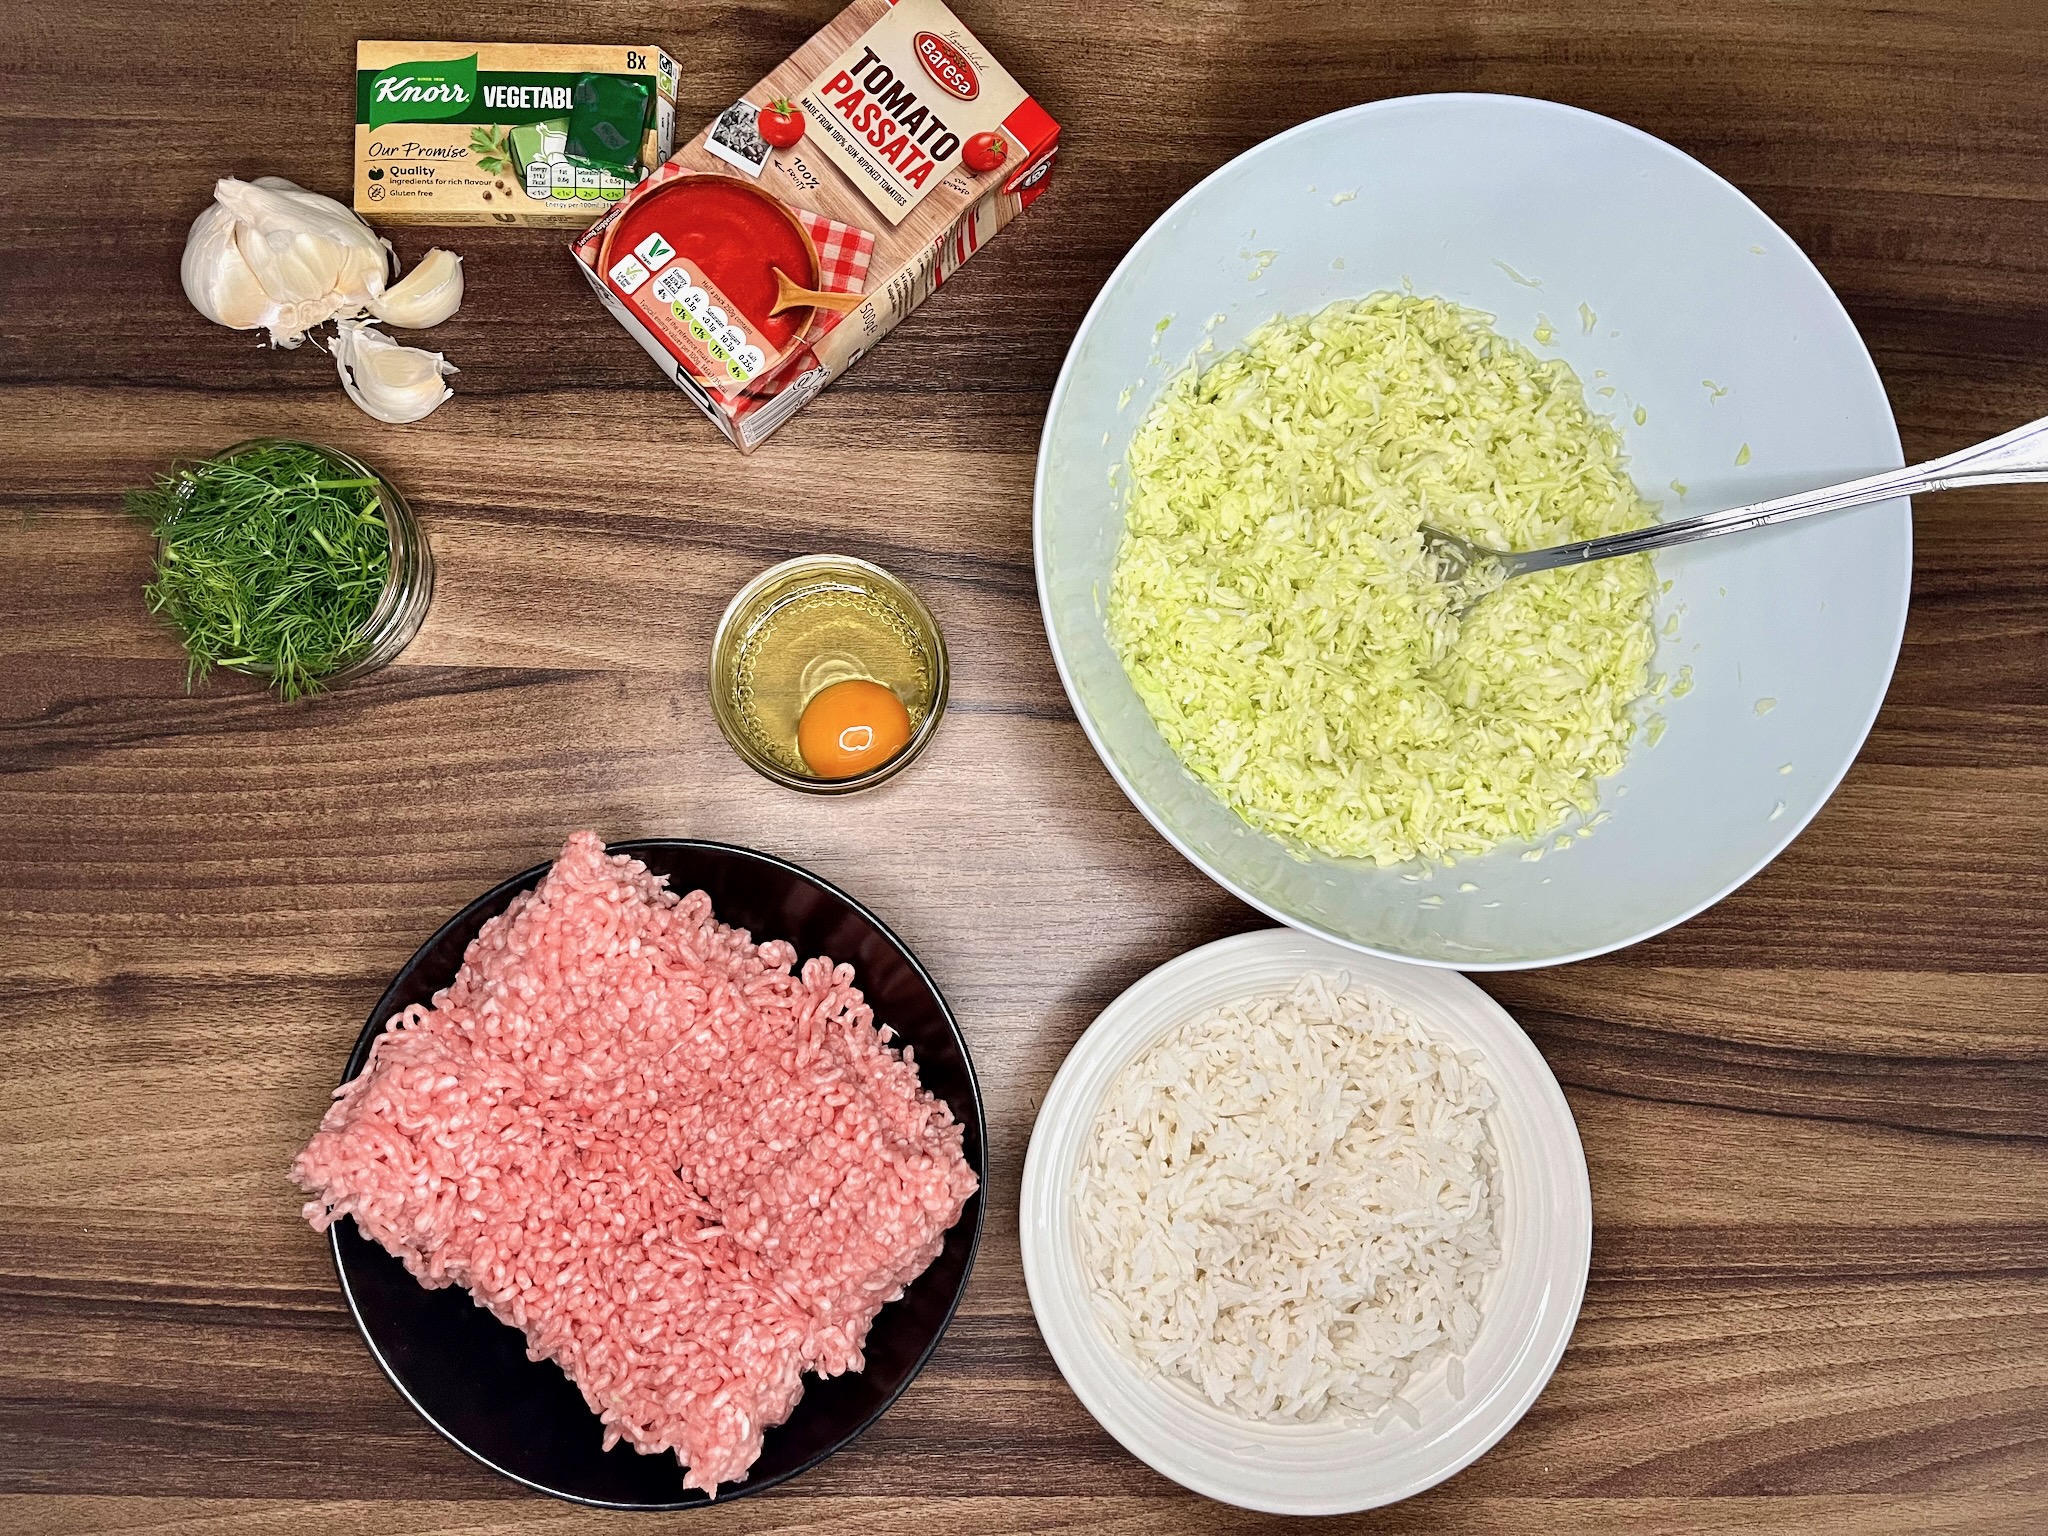 All ingredients are neatly laid out on the kitchen countertop, ready to be used to make No Roll Polish Gołąbki